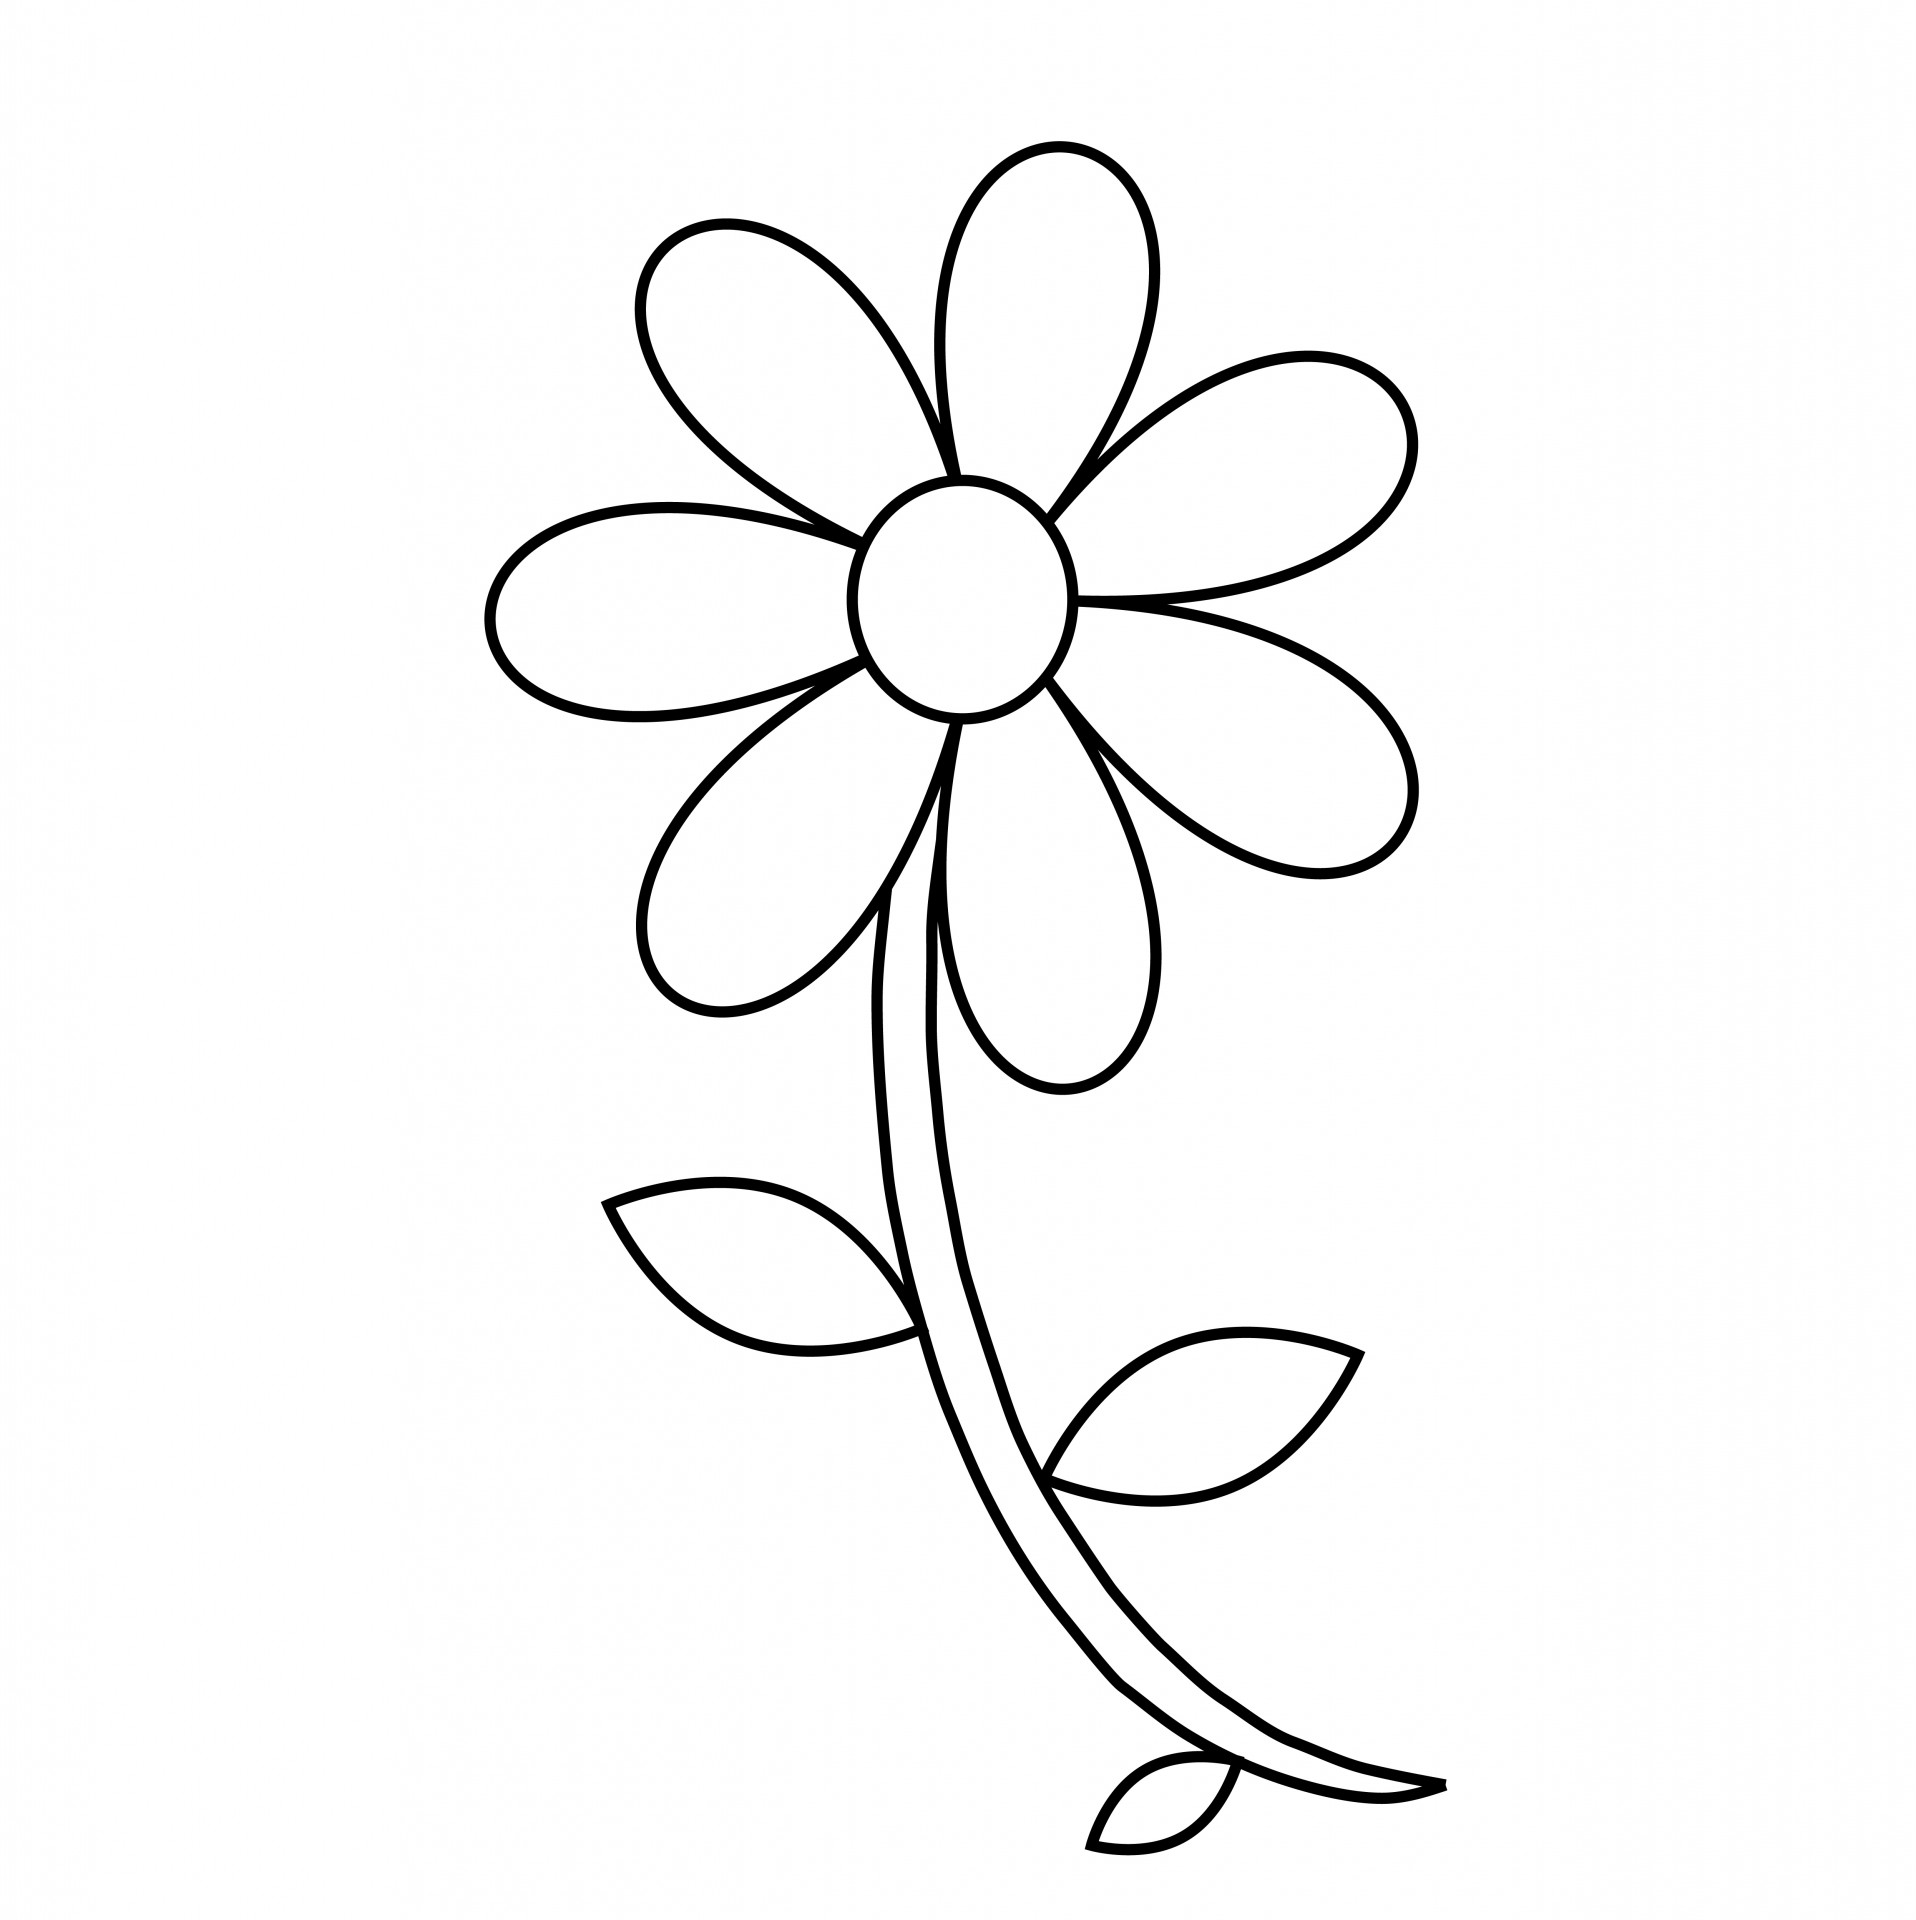 Flowers For > Simple Flower Black And White Outline